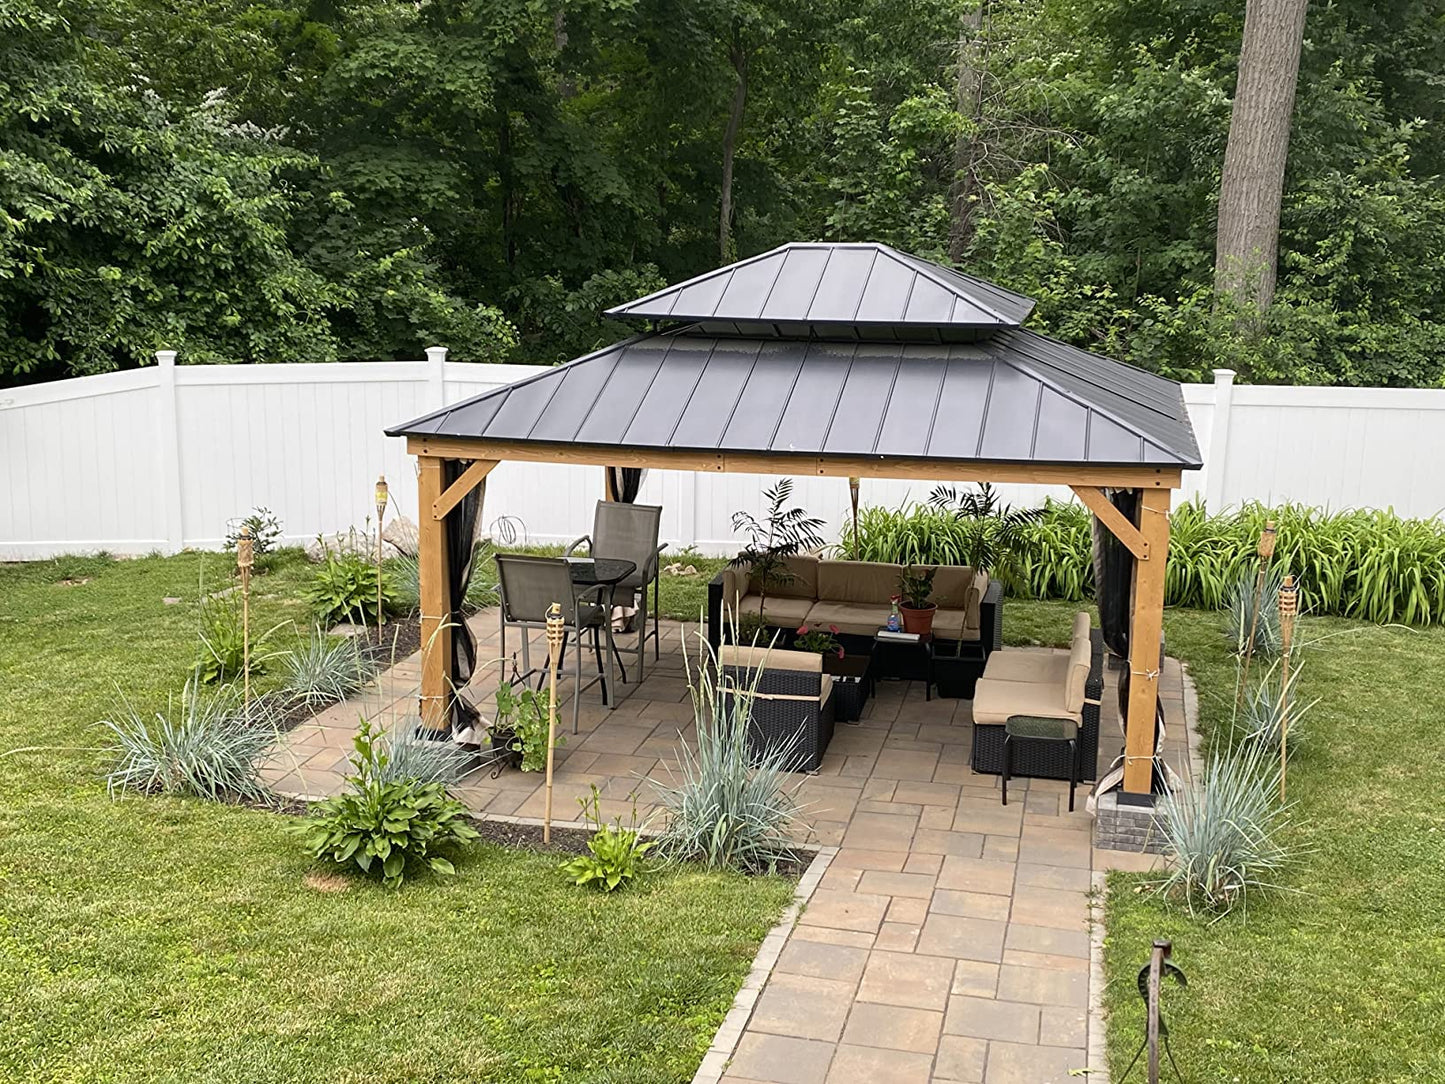 YOLENY 13' x 15' Wood Gazebo, Spruce Frame Outdoor Hardtop Gazebo with Metal Roof, Privacy Curtains and Nettings for Patio, Garden, Backyard